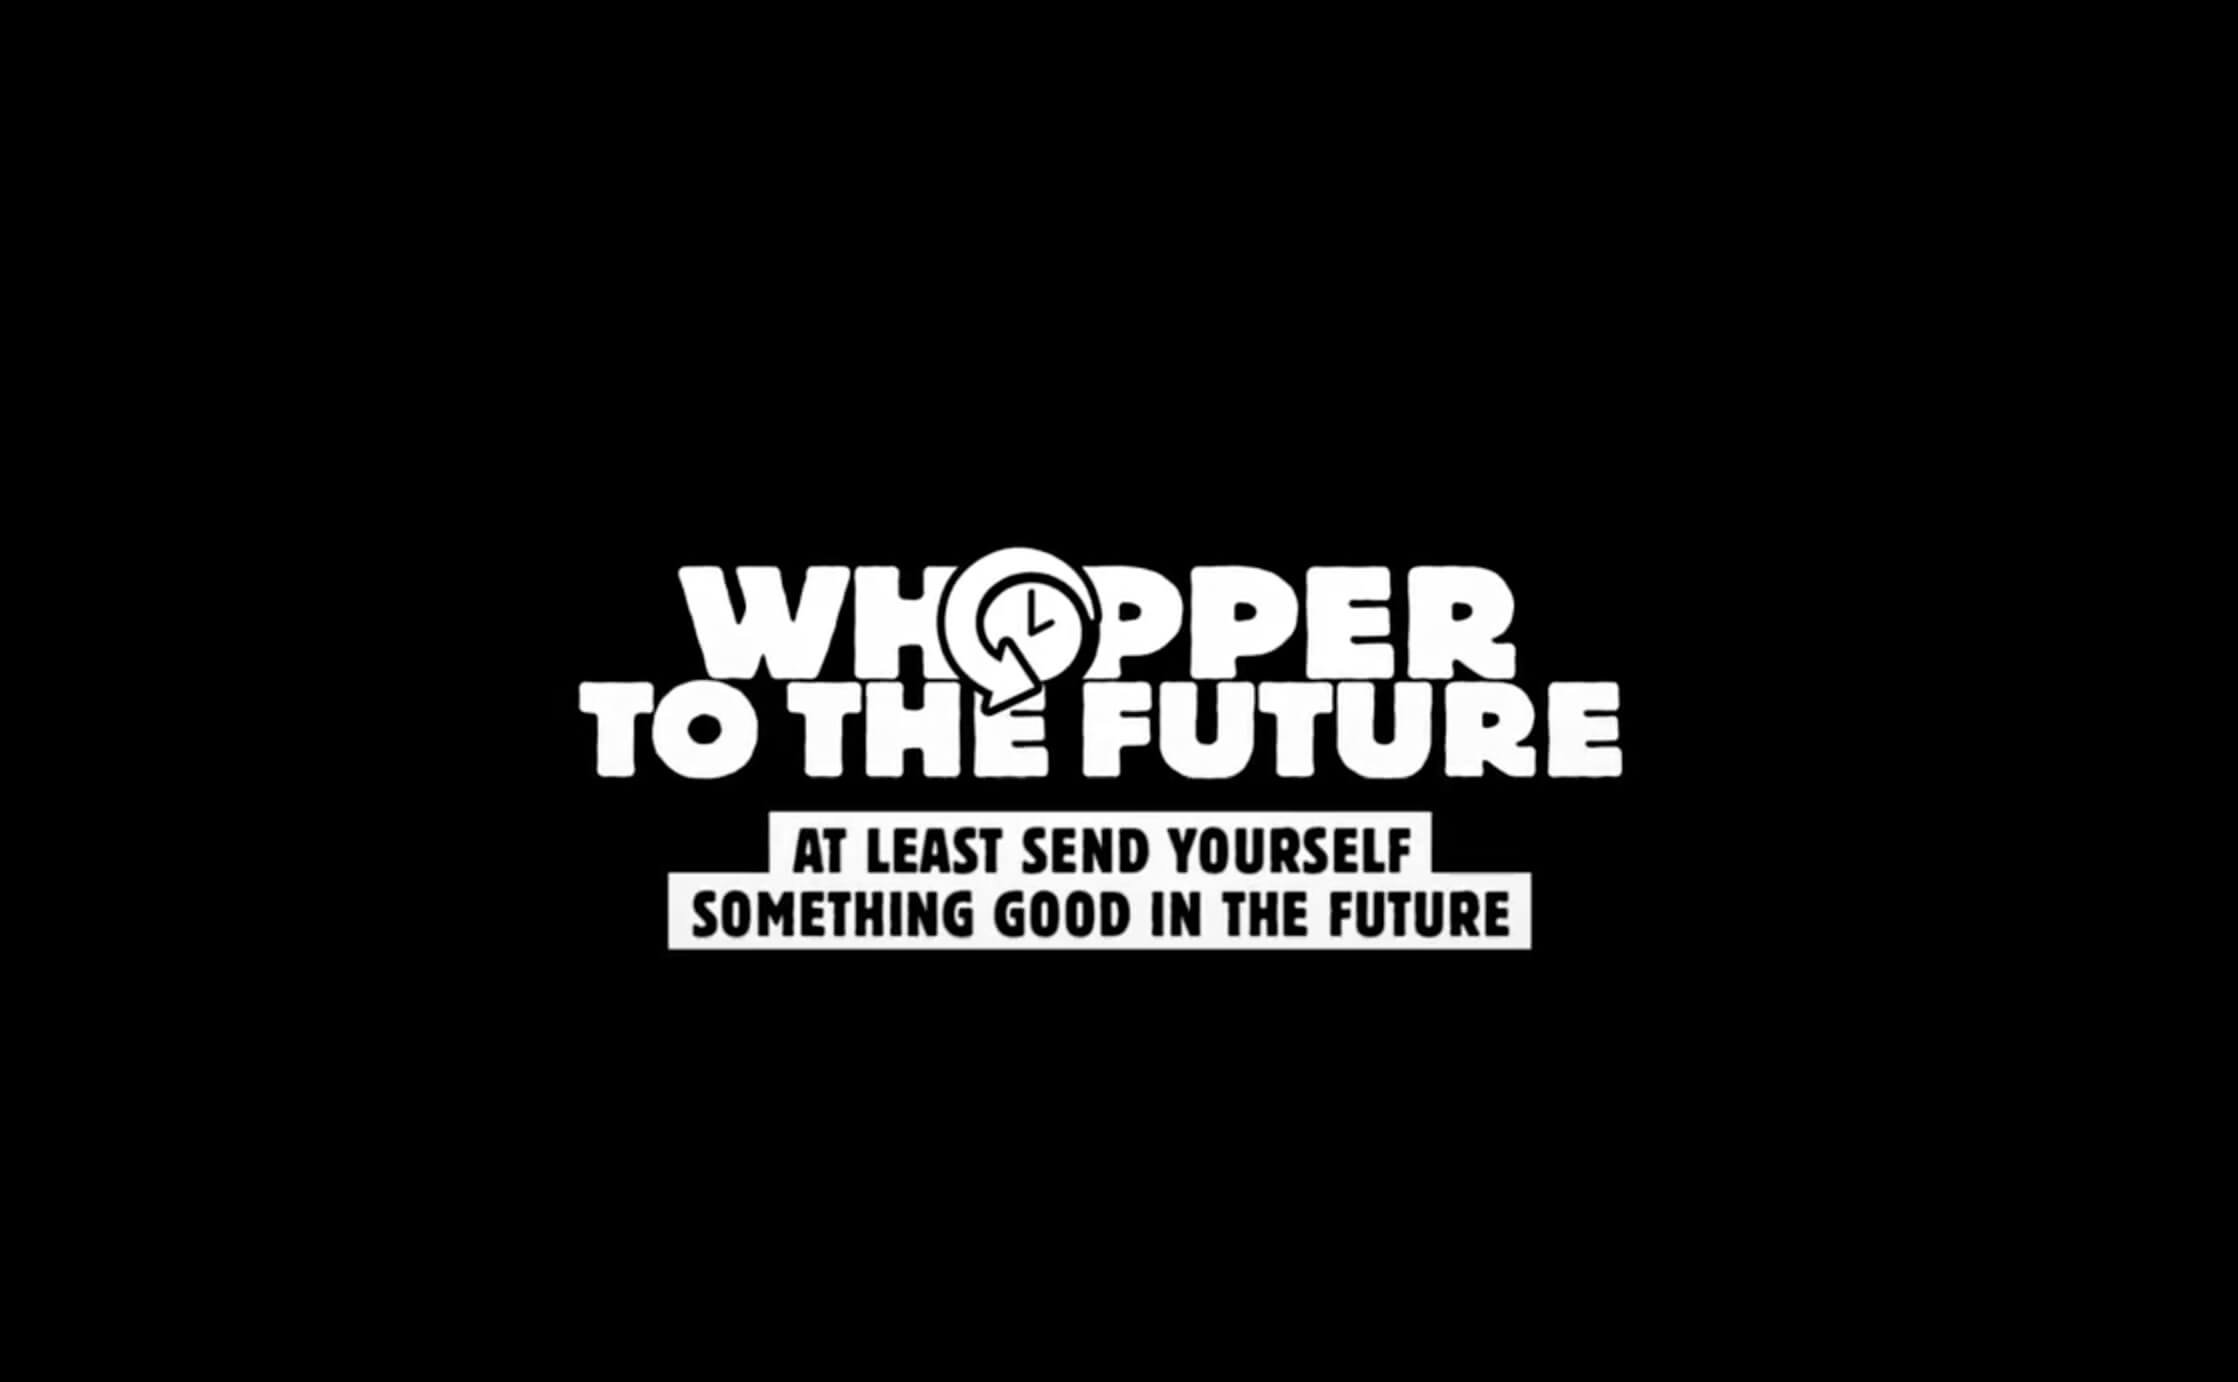 Whopper to the Future by Burger King